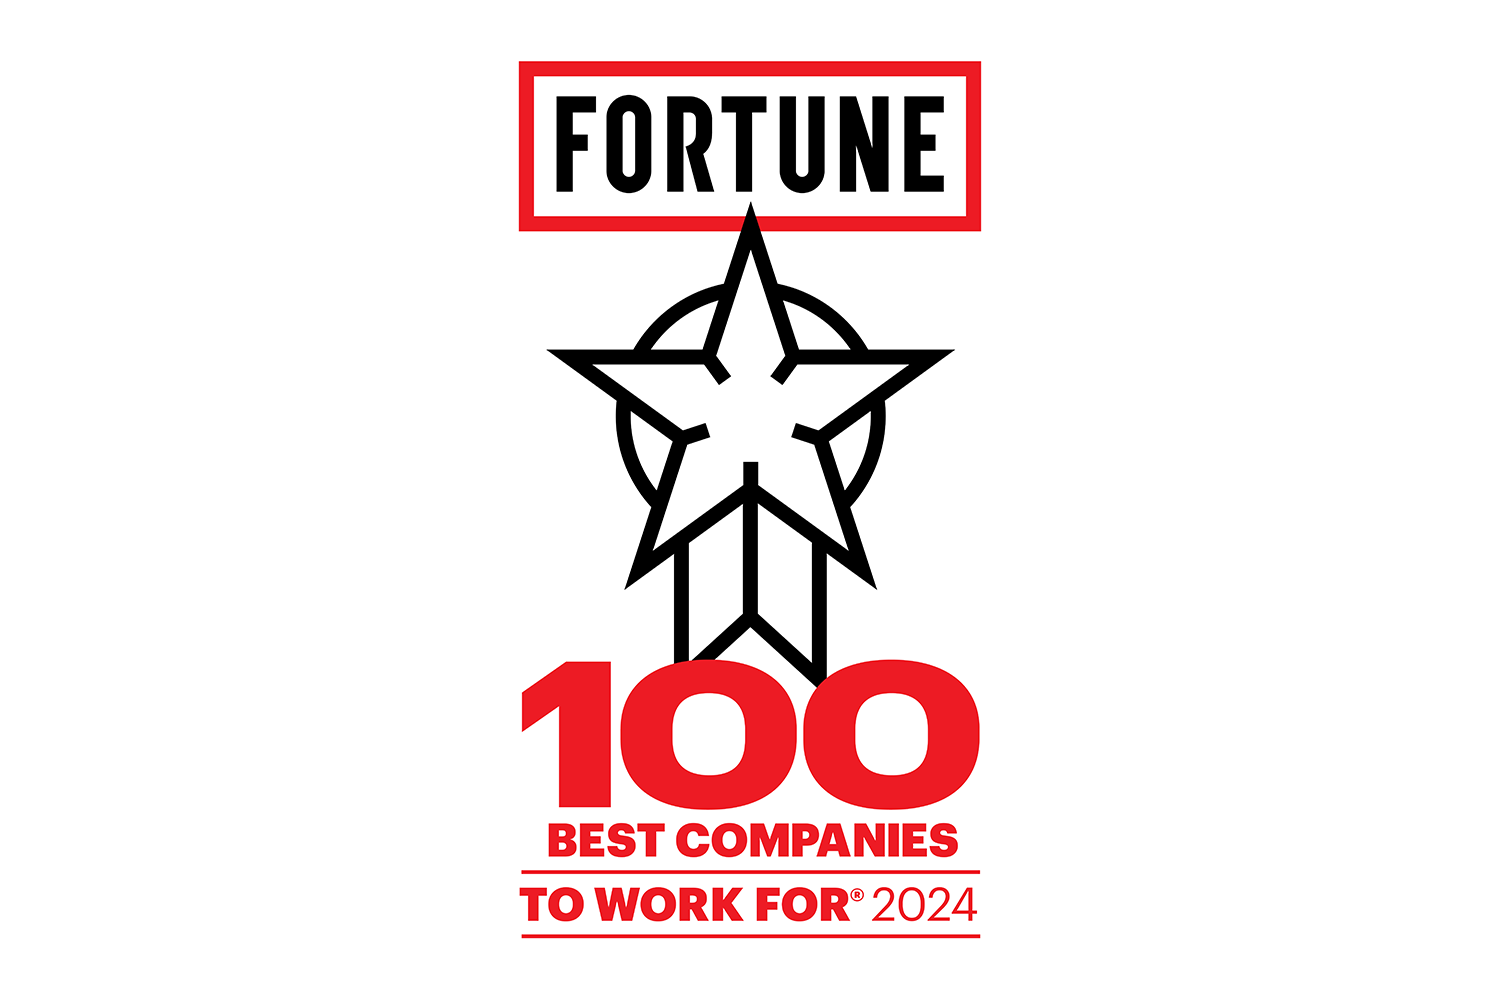 For the nineth year in a row, Slalom recognized as a Fortune 100 Best Companies to Work For